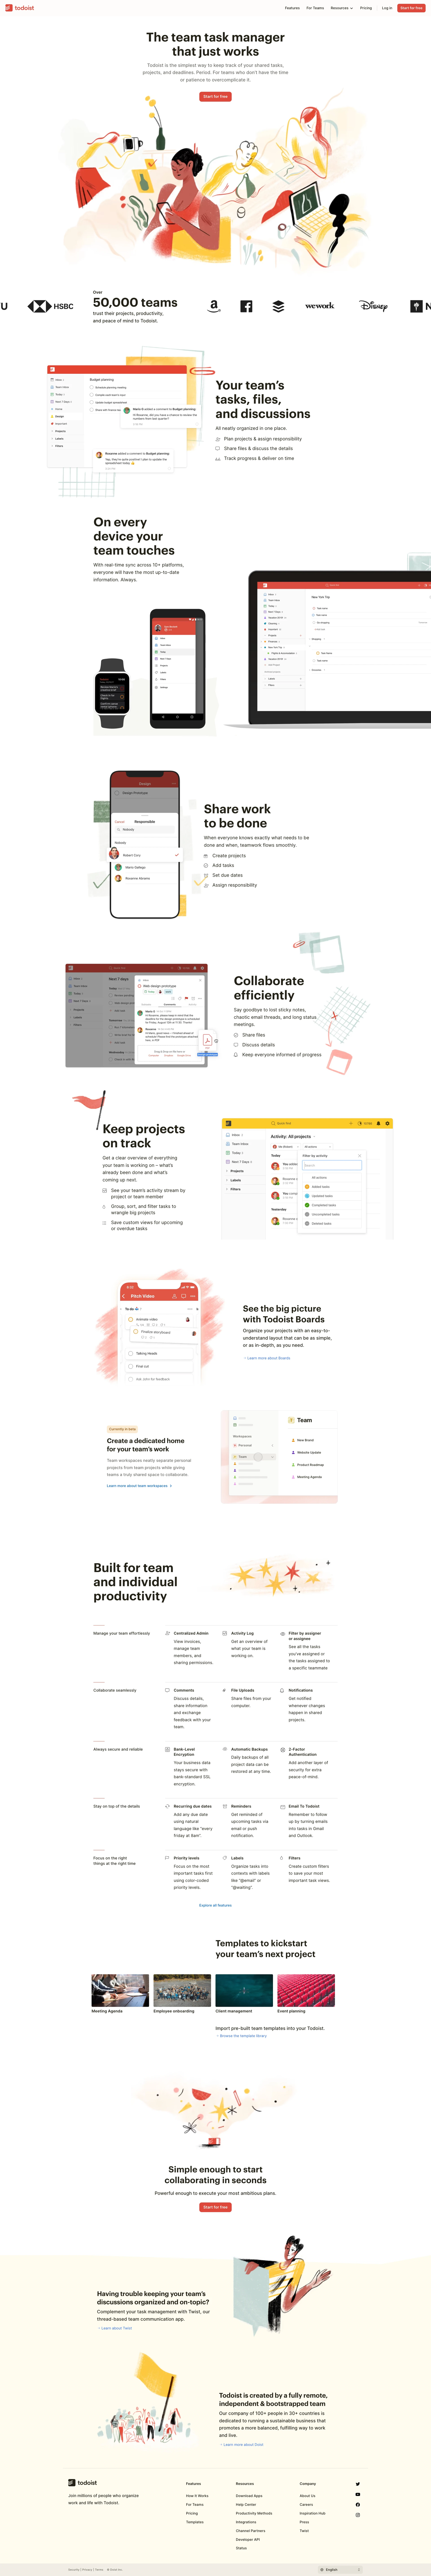 Todoist Landing Page Example: Organize your work and life, finally. Become focused, organized, and calm with Todoist. The world’s #1 task manager and to-do list app.